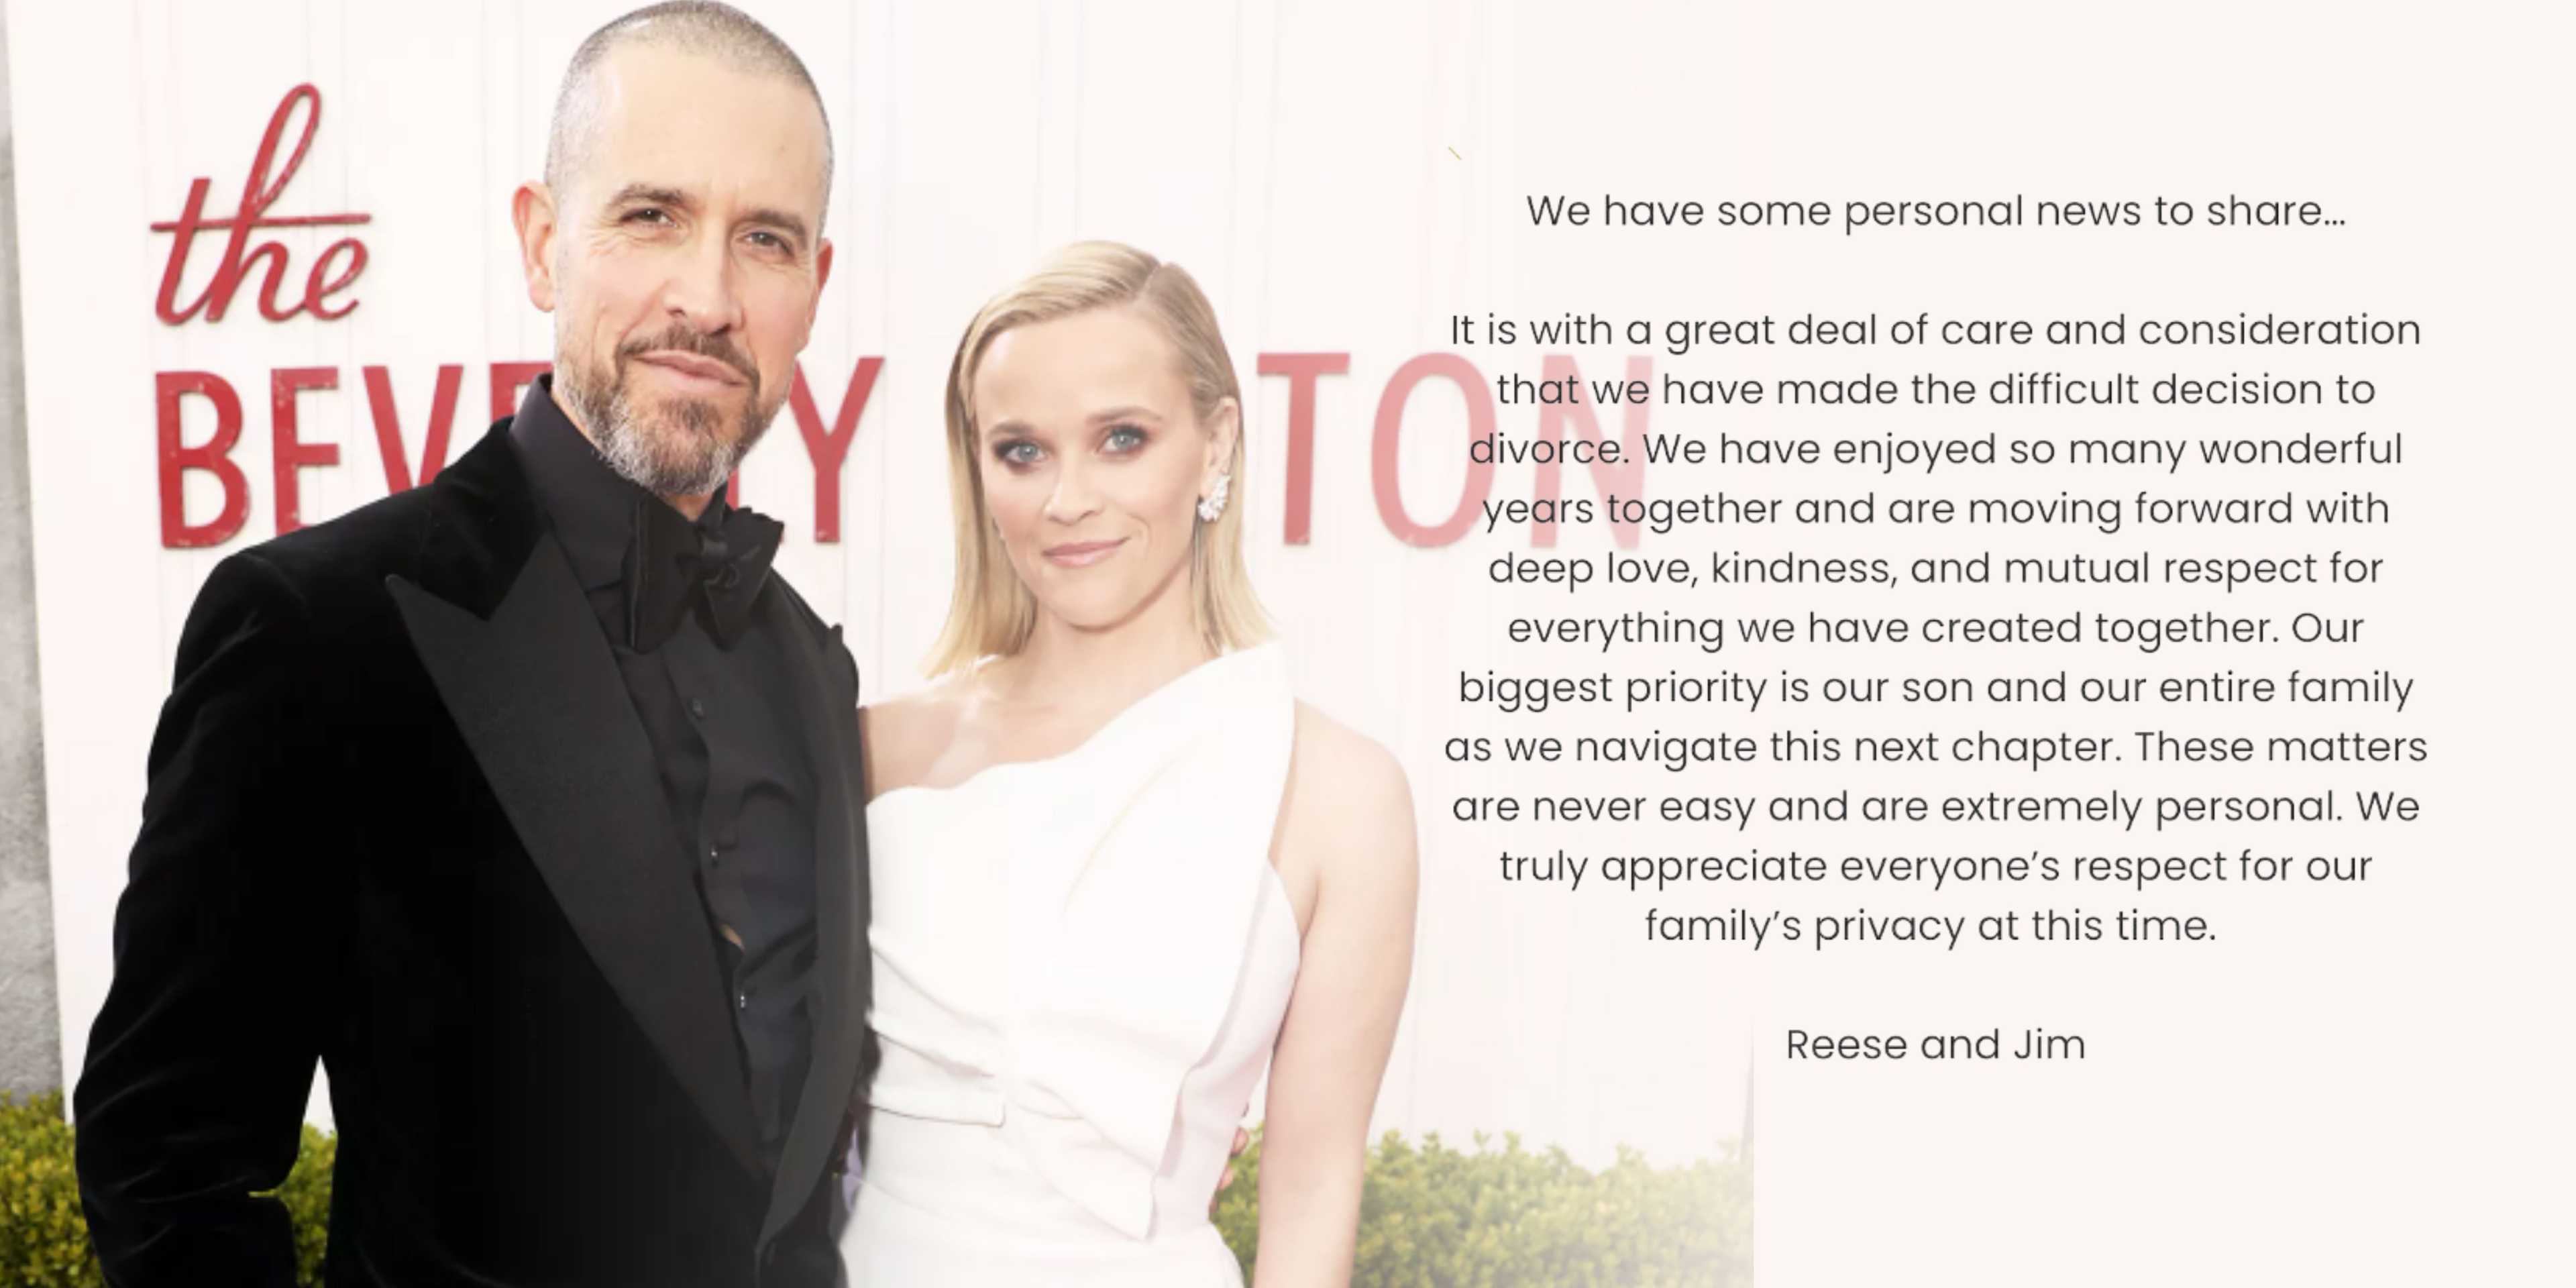 Reese Witherspoon, Jim Toth announce divorce after 12 years of marriage